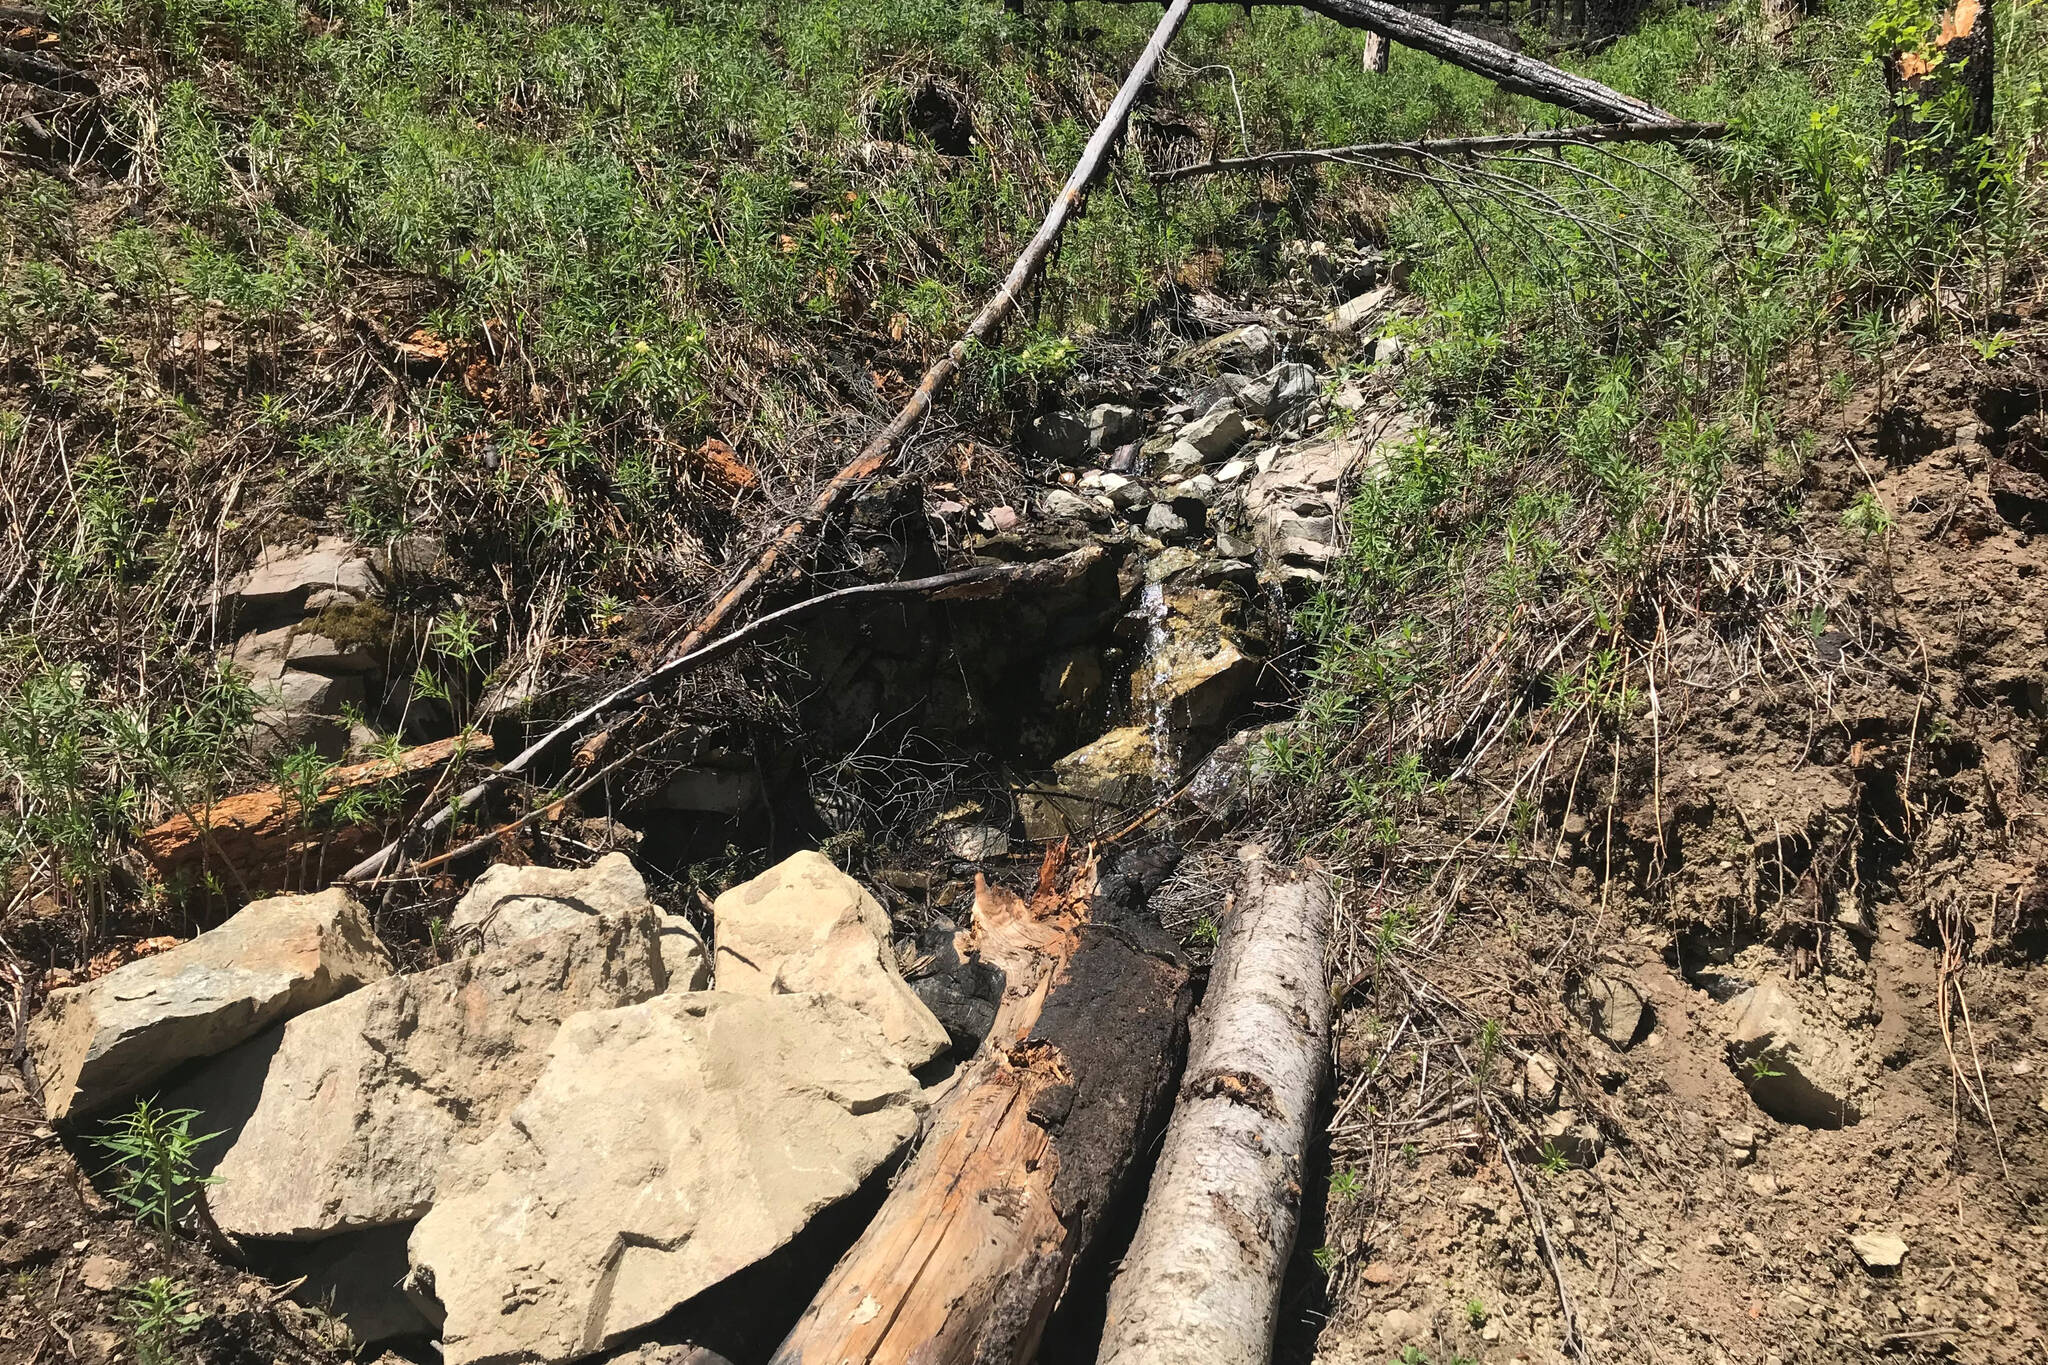 The damage left behind by a water diversion that was done without authorization by the Ministry of Forests in the South Okanagan Grassland Protected Area. (Contributed - Jesse Zeman, BC Wildlife Federation)